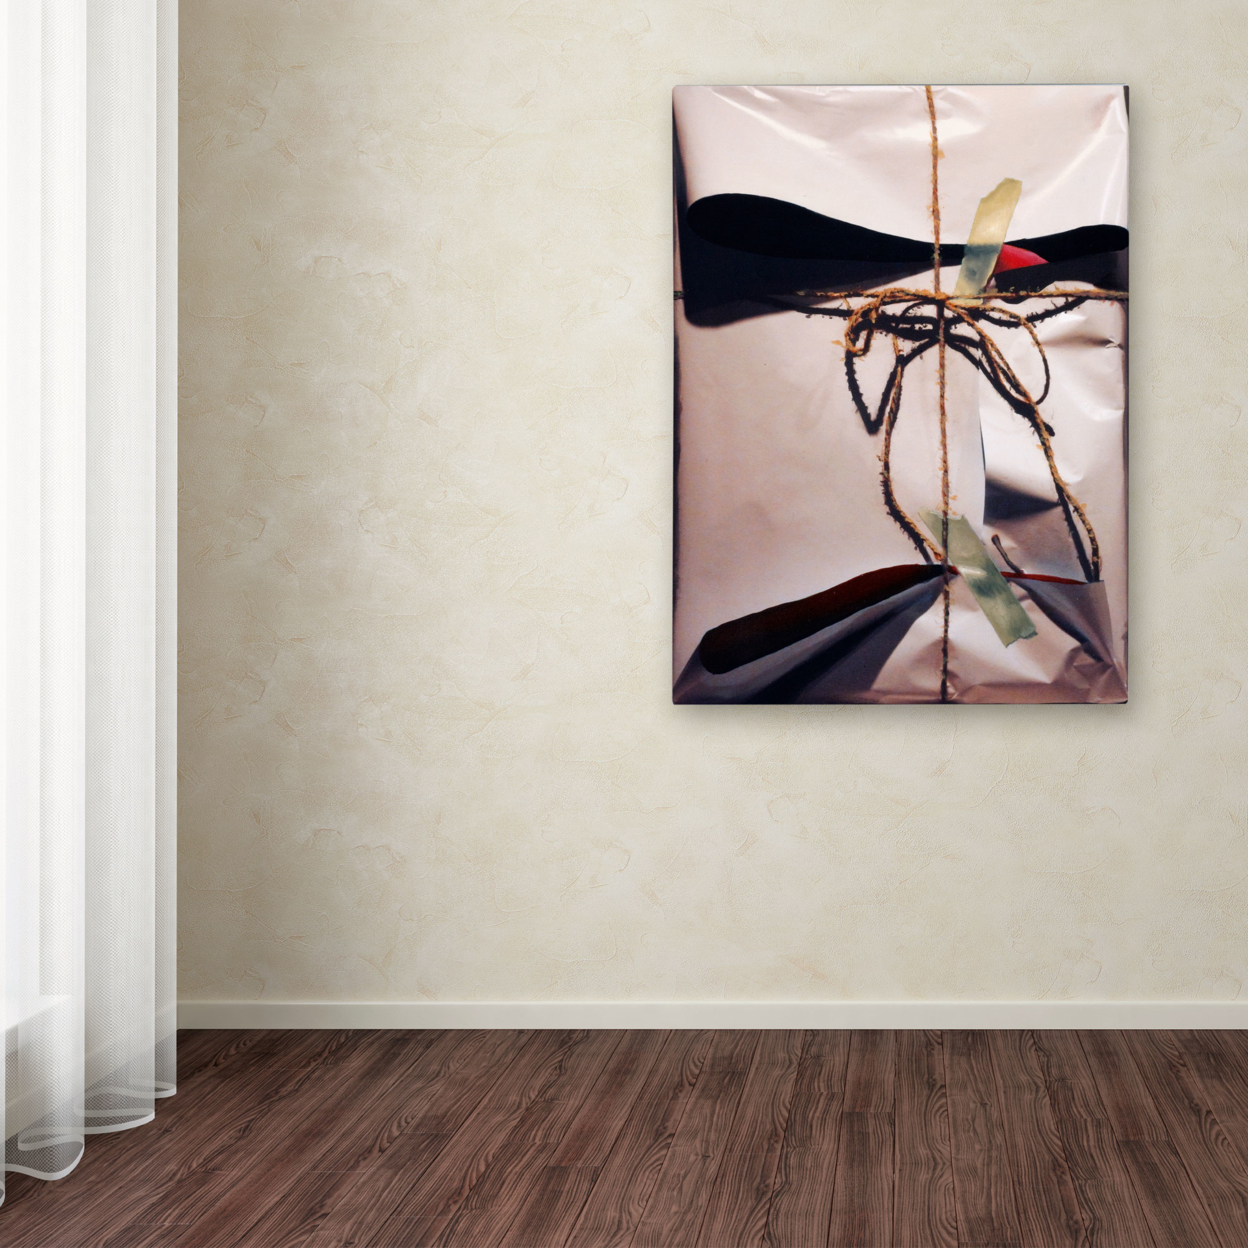 Roderick Stevens 'White Wrap With Twine' Canvas Art 18 X 24